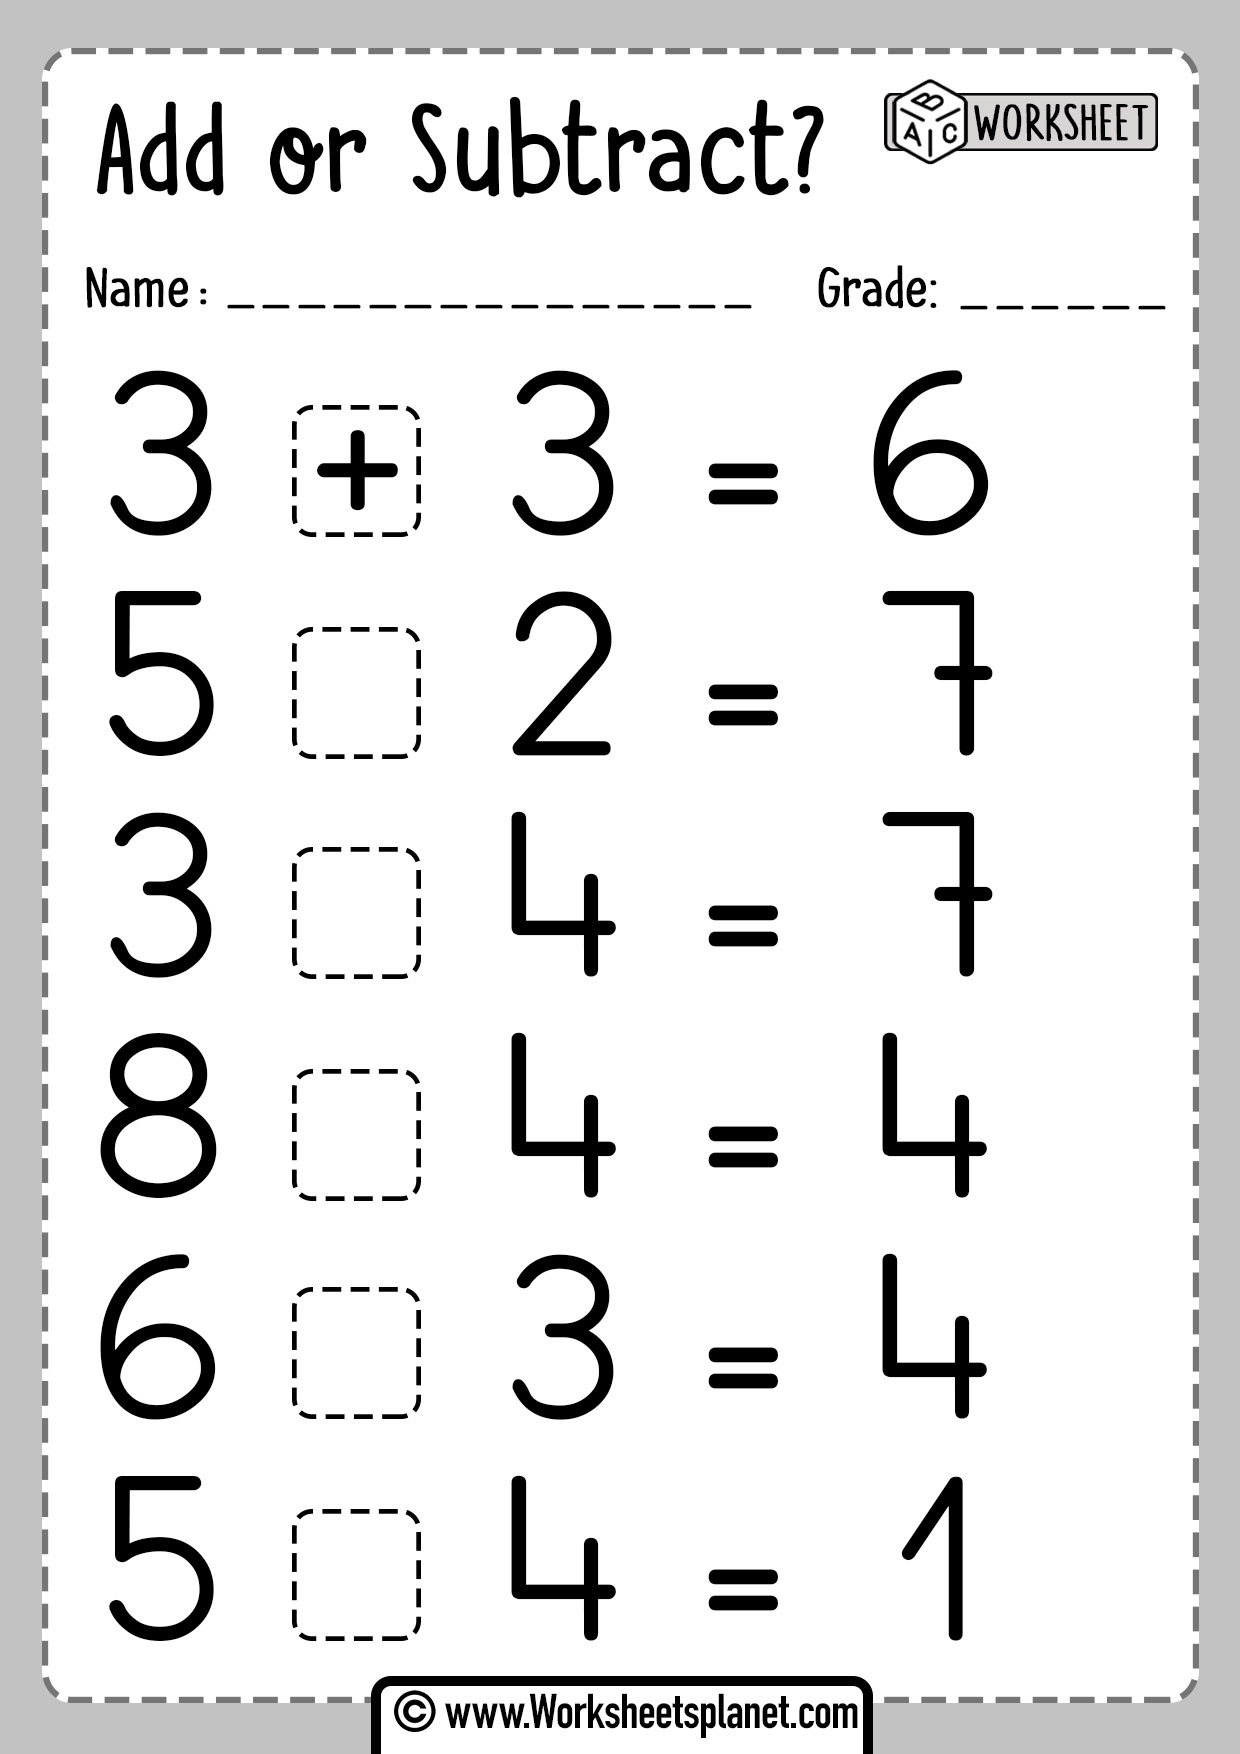 Addition Subtraction Exercises